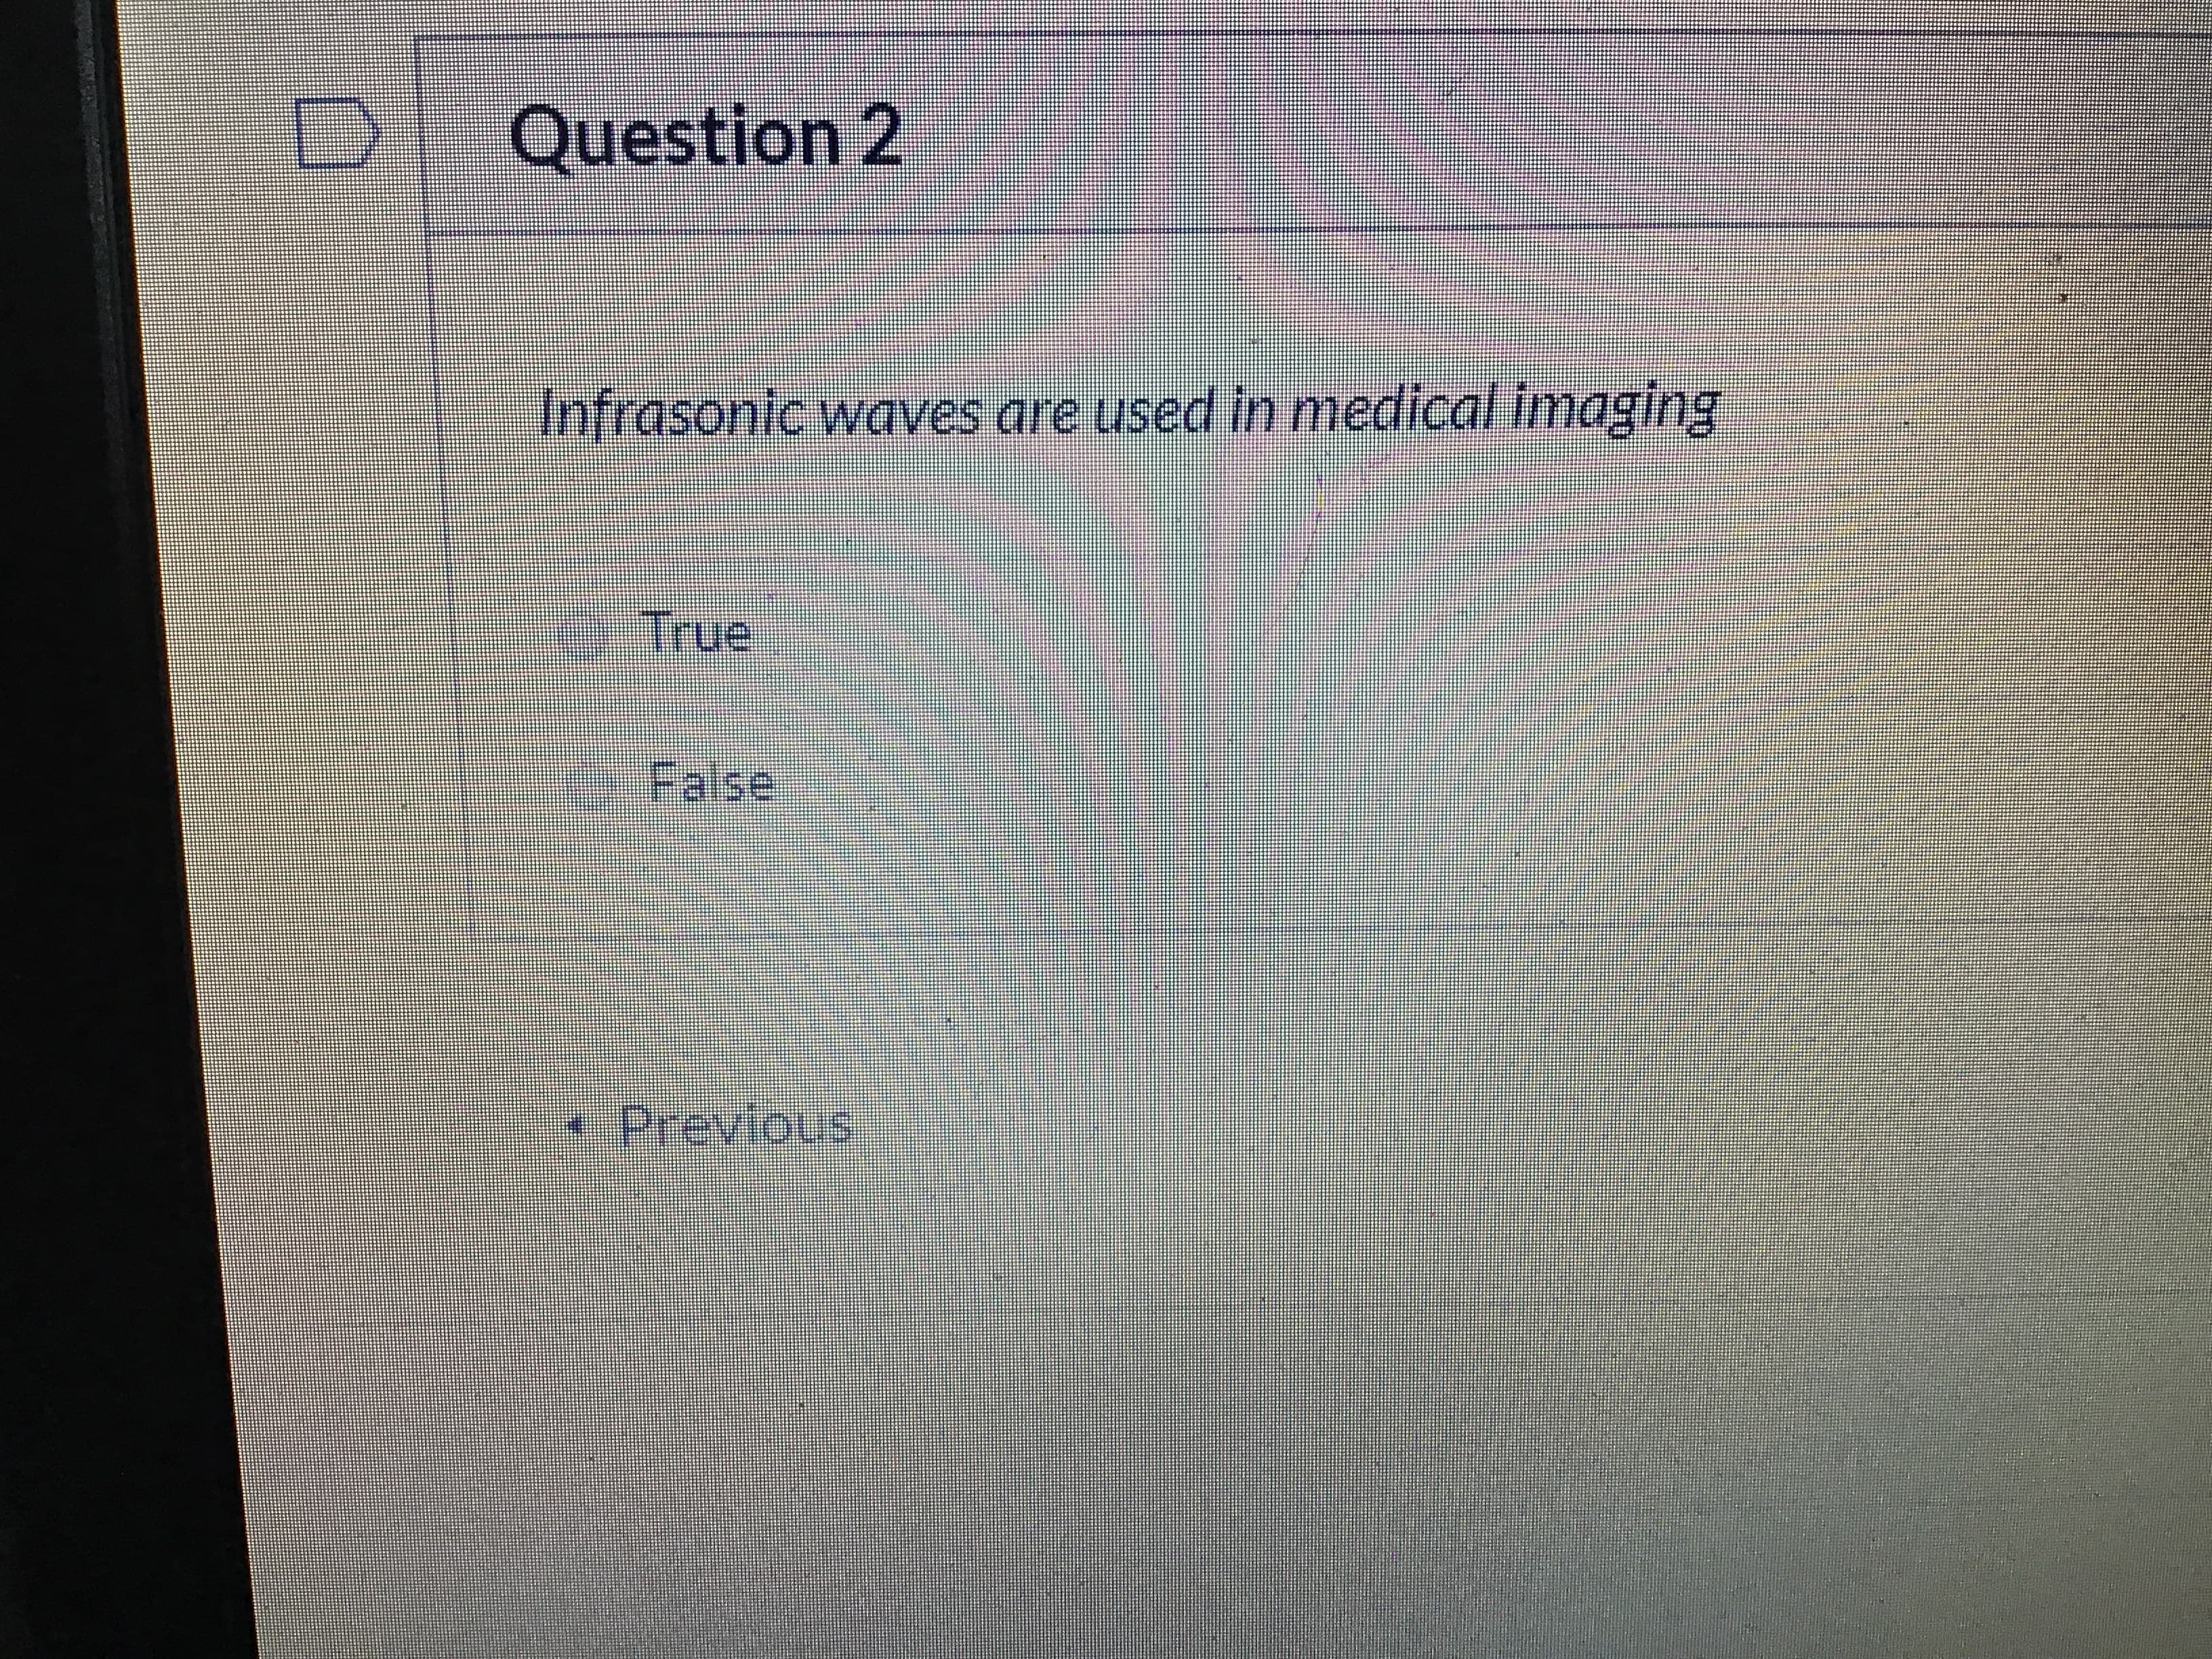 Infrasonic waves are used in medical imaging
